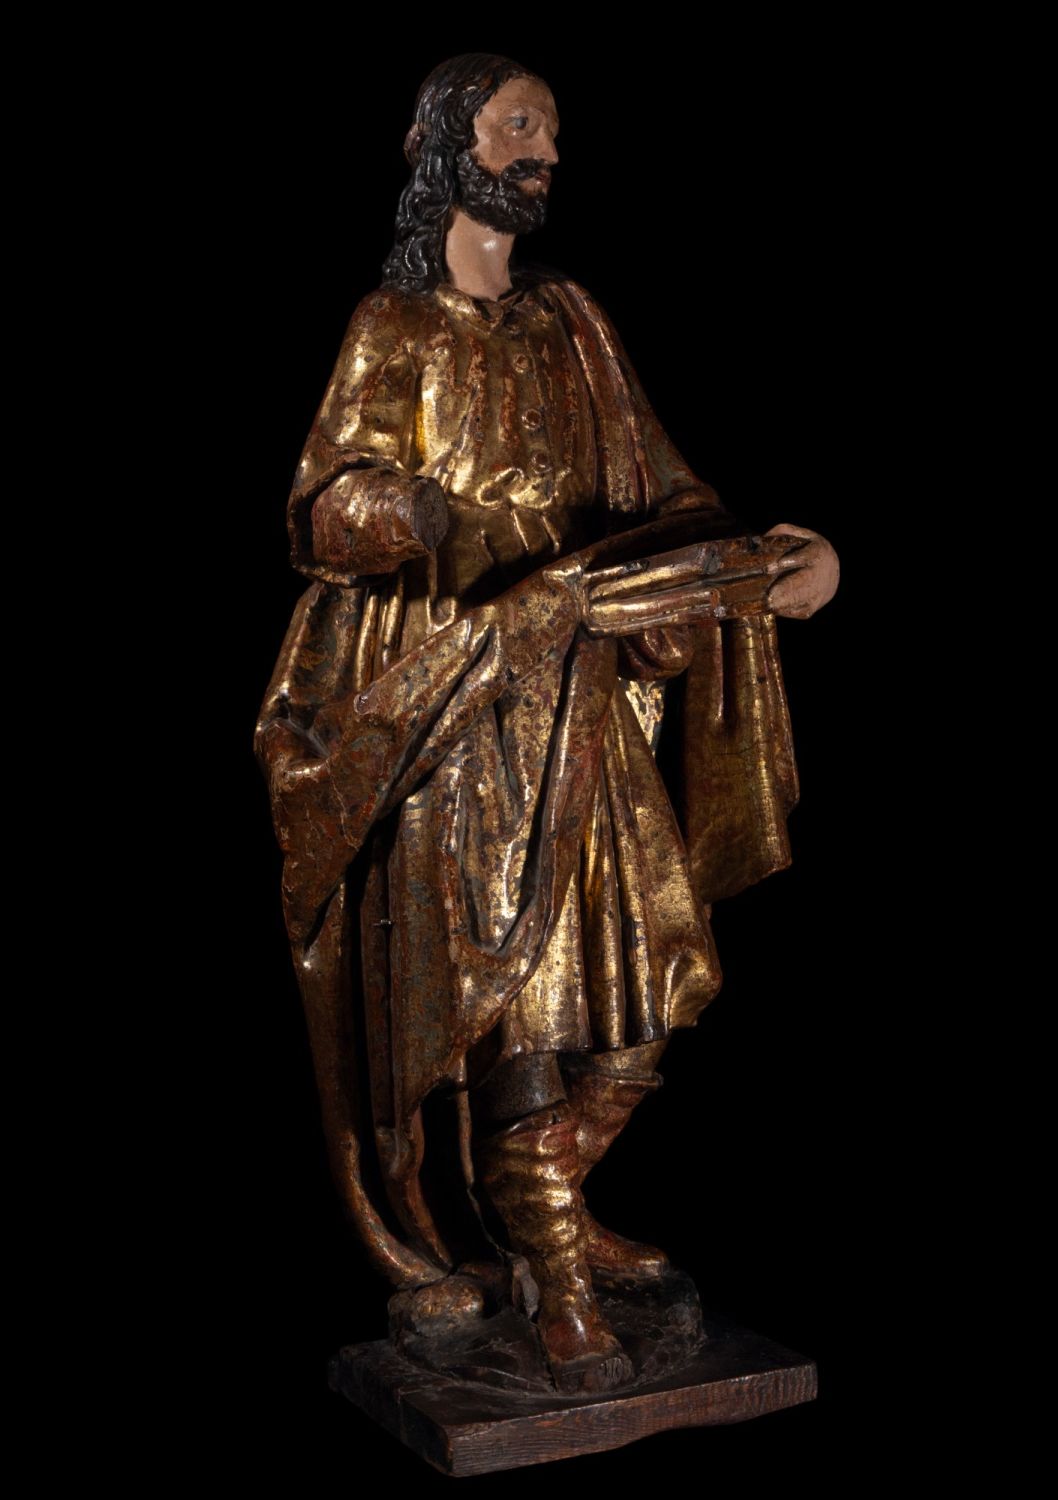 Large Romanist Sculpture of Saint John the Evangelist, Cologne, Southern Germany, 16th century - Image 3 of 4